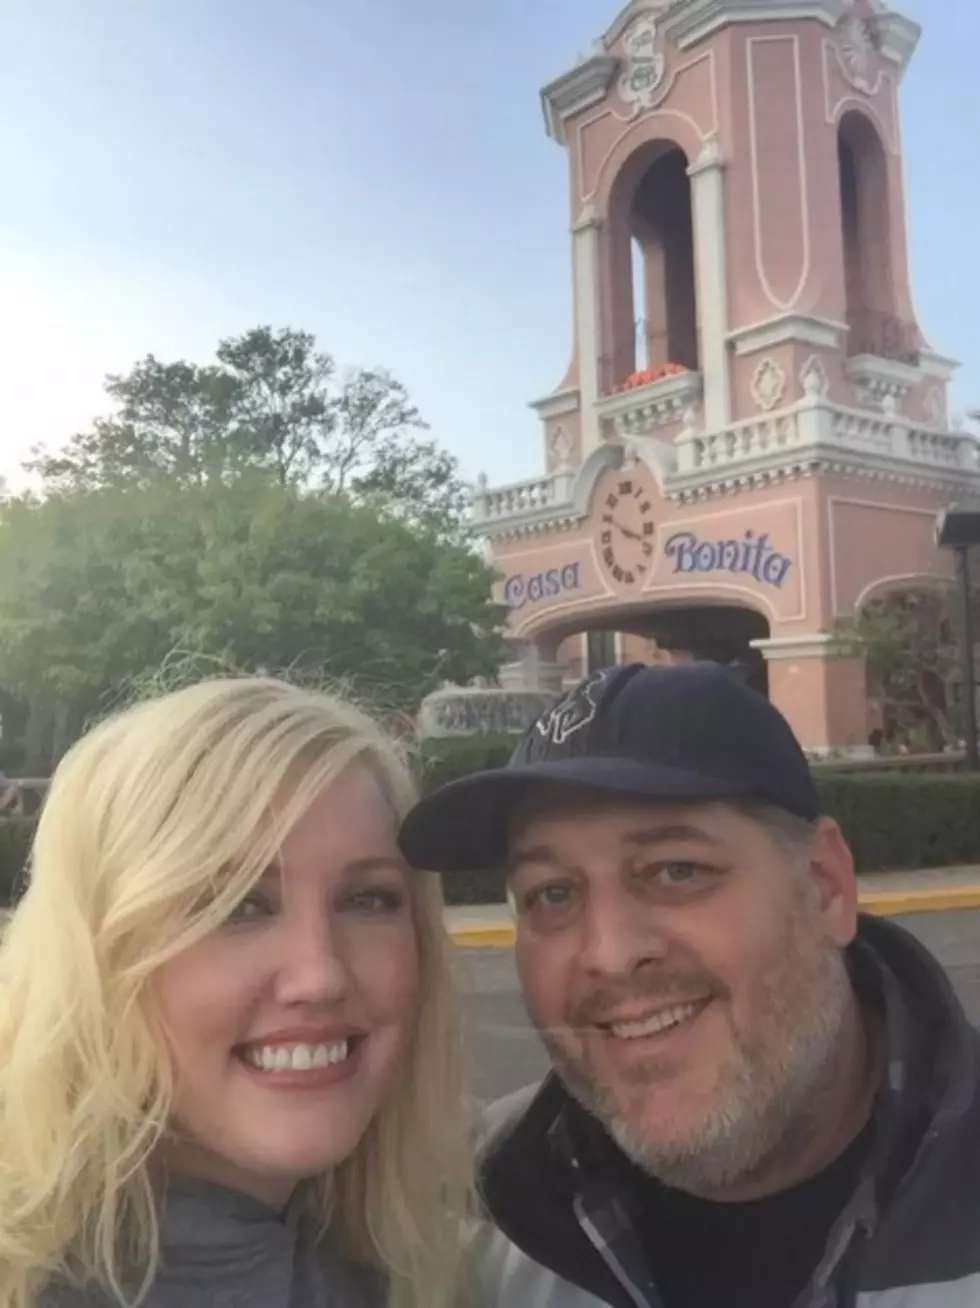 Casa Bonita is Just as Fun&#8230;And The Food Is Just as Bad